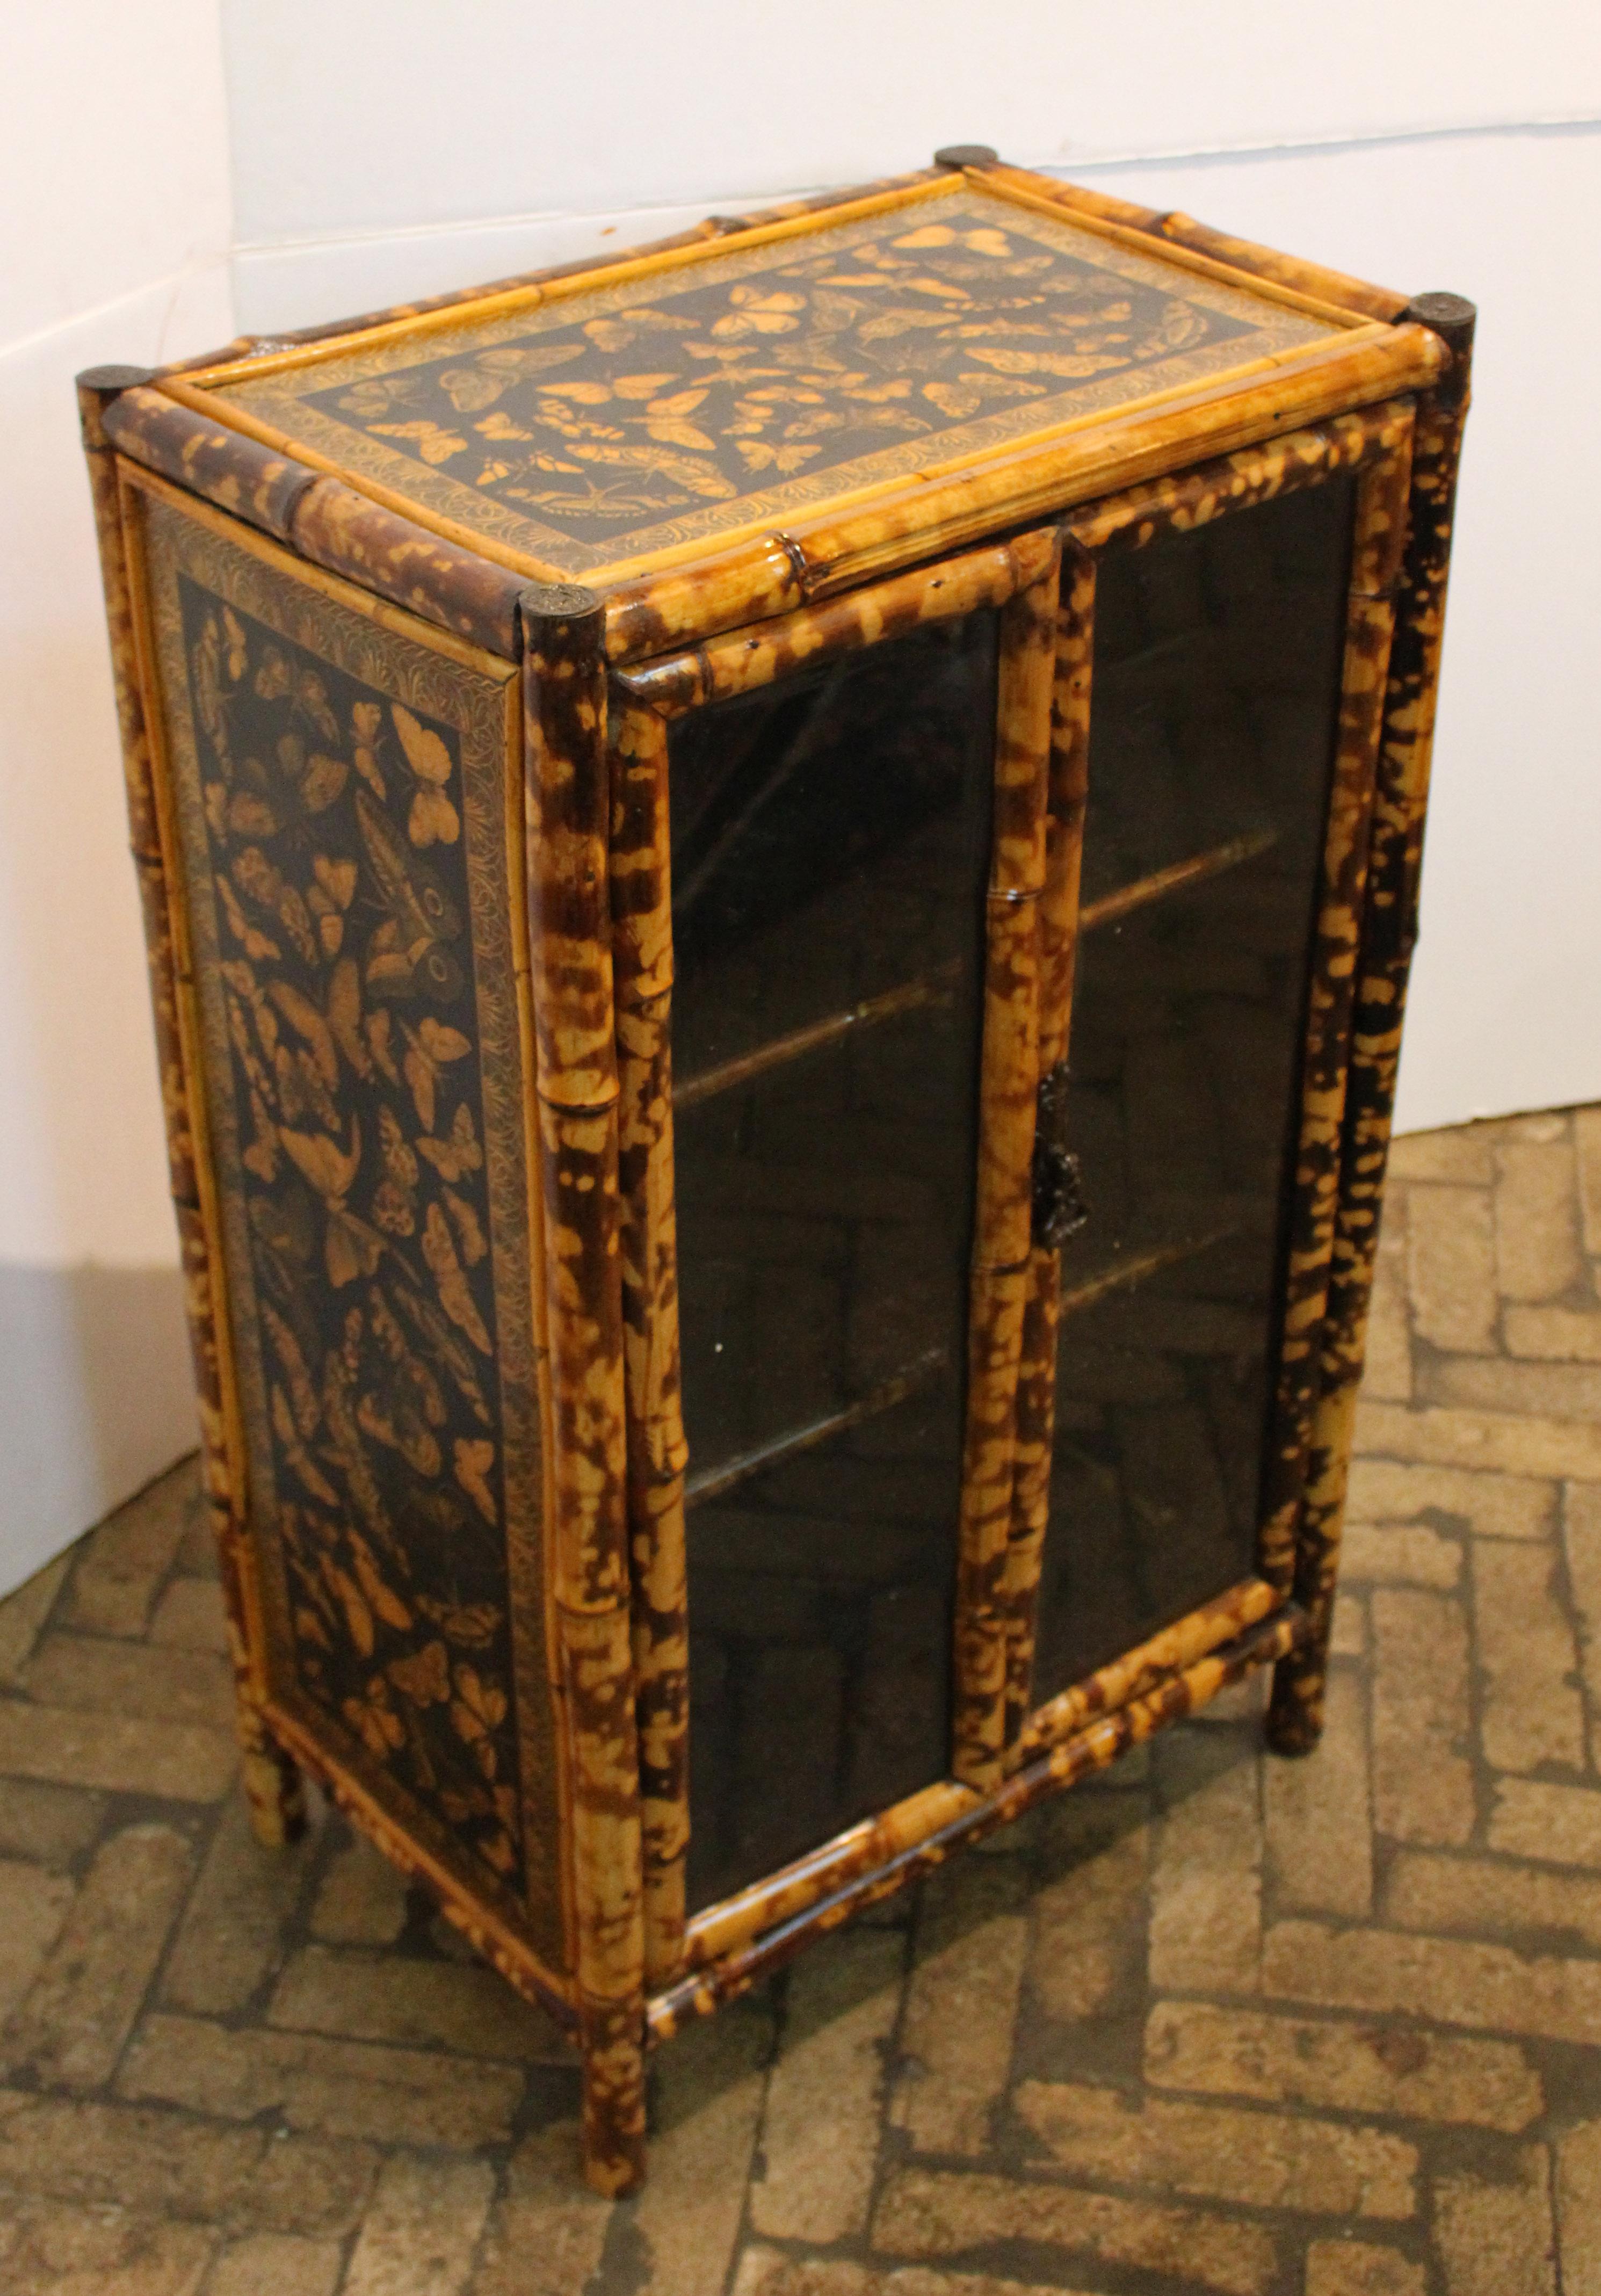 Petite double glazed door bamboo cabinet, English, c.1870. Well figured bamboo. Sweet size for many spots. Newly decoupaged with butterflies.

We are a family business that has been a major source for the selective buyer for over 90 years. We are